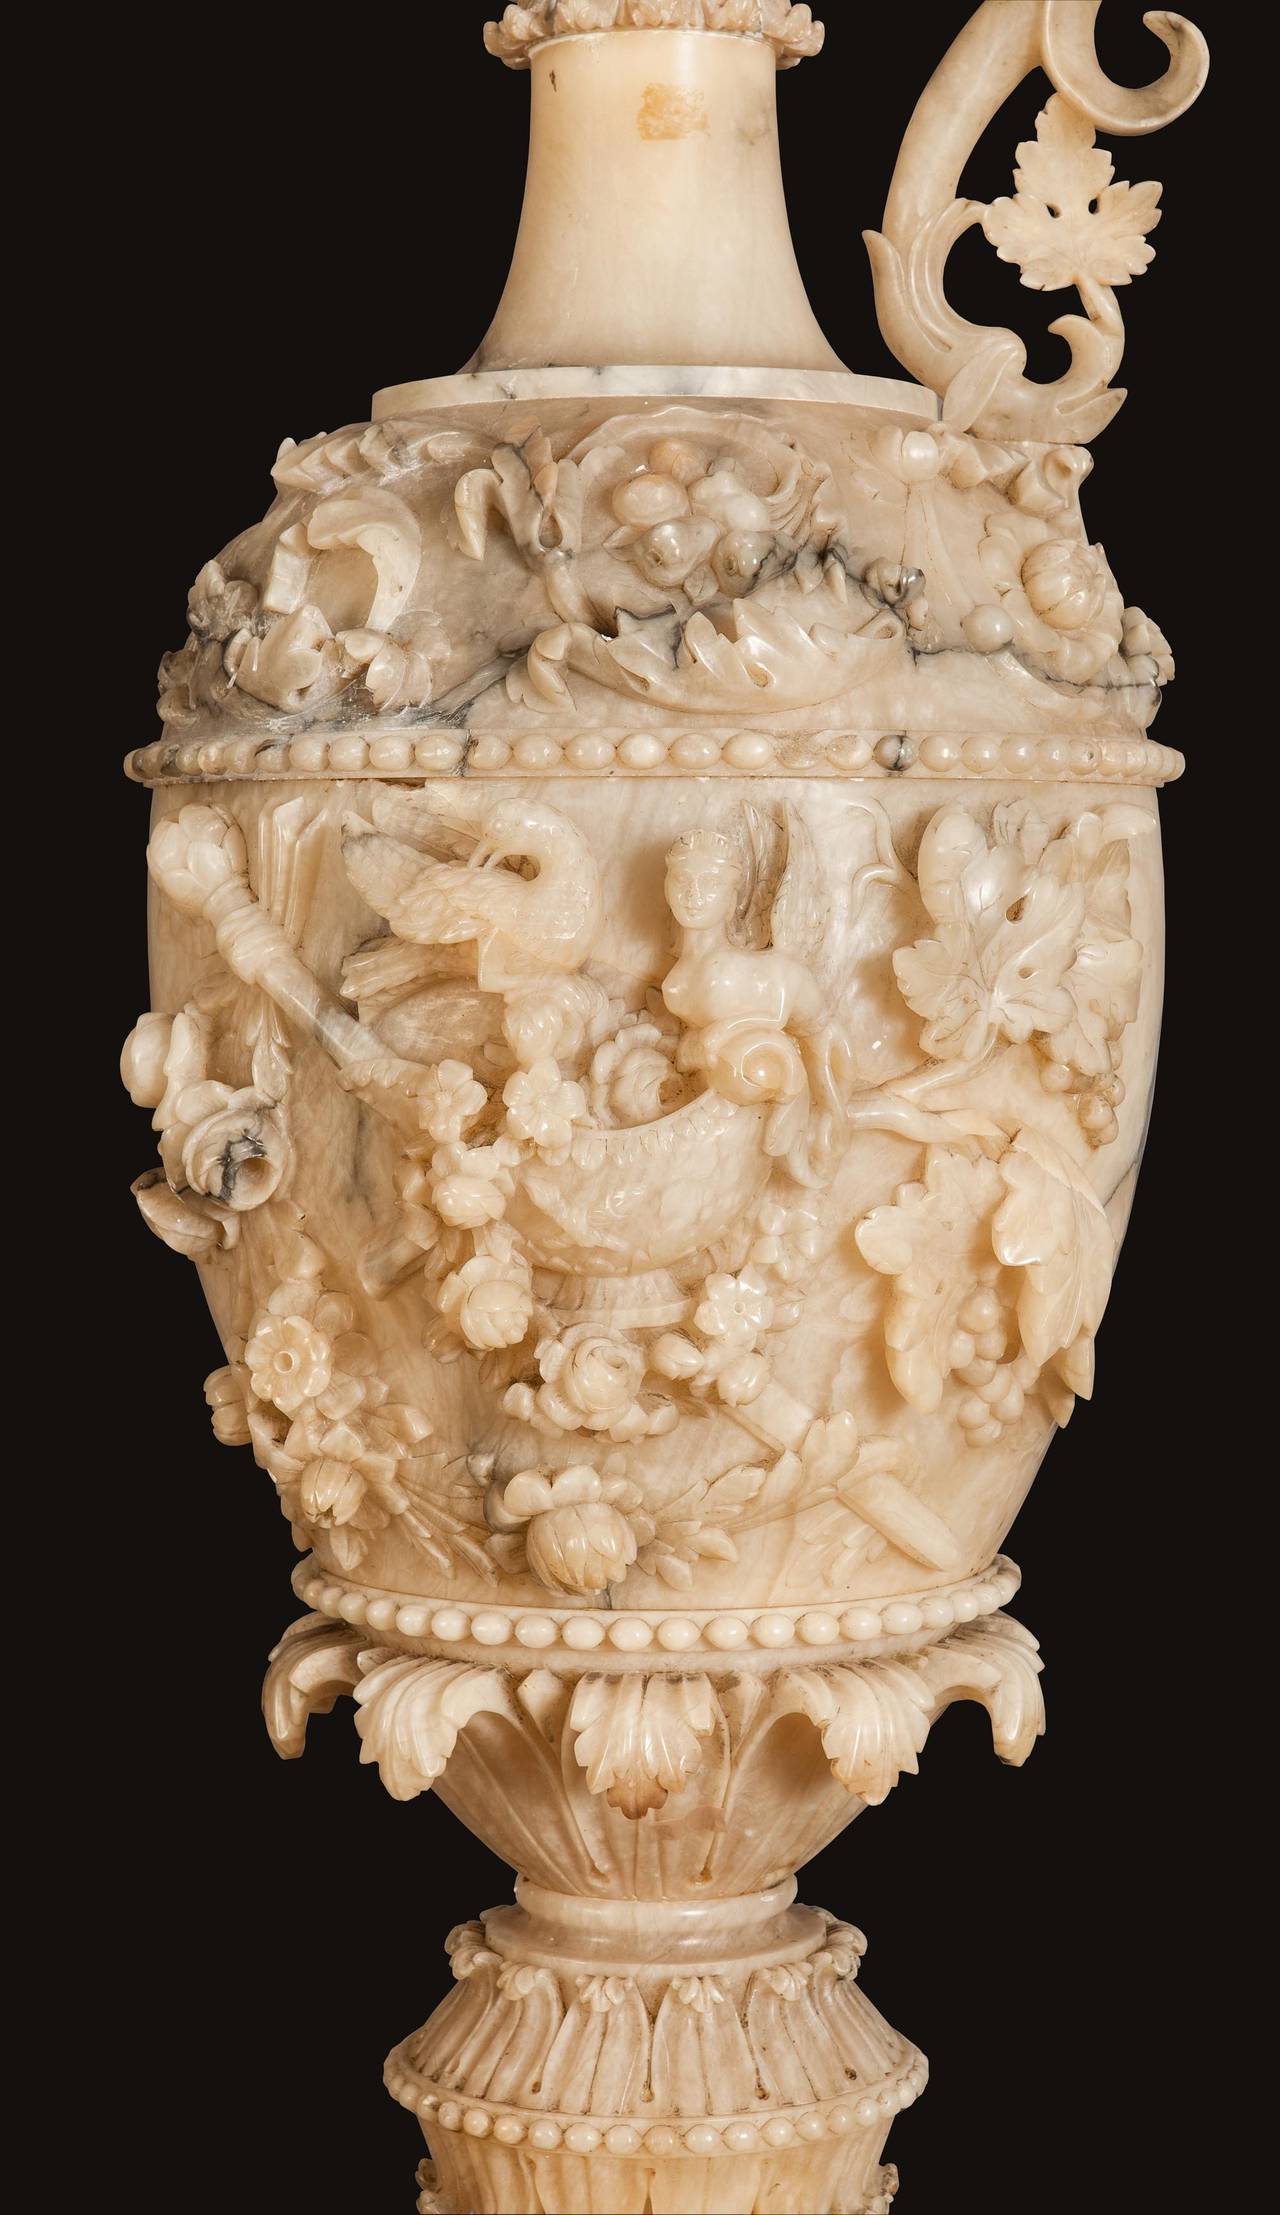 A Pair of Monumental Vases on Pedestals
in the Neo-Renaissance Manner

Constructed in alabaster which has been masterfully carved; rising from octagonal bases, supporting fluted, garland draped pedestals, upon which rest handled ewers, in the